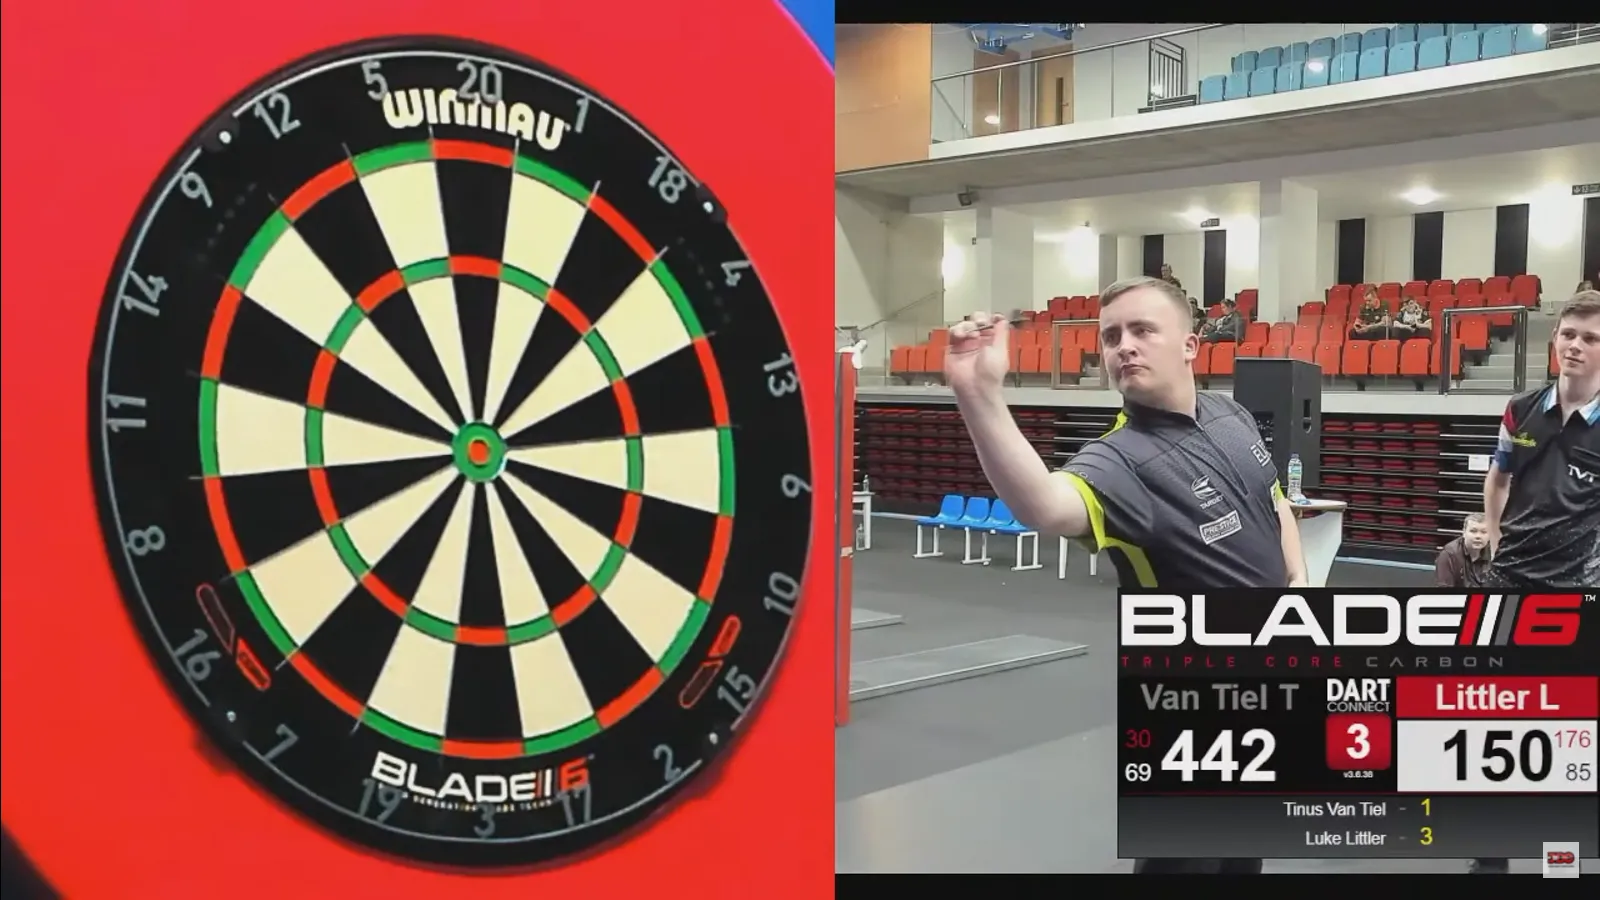 2021 11 25 14 37 05 JDC MvG Masters Open  YouTube